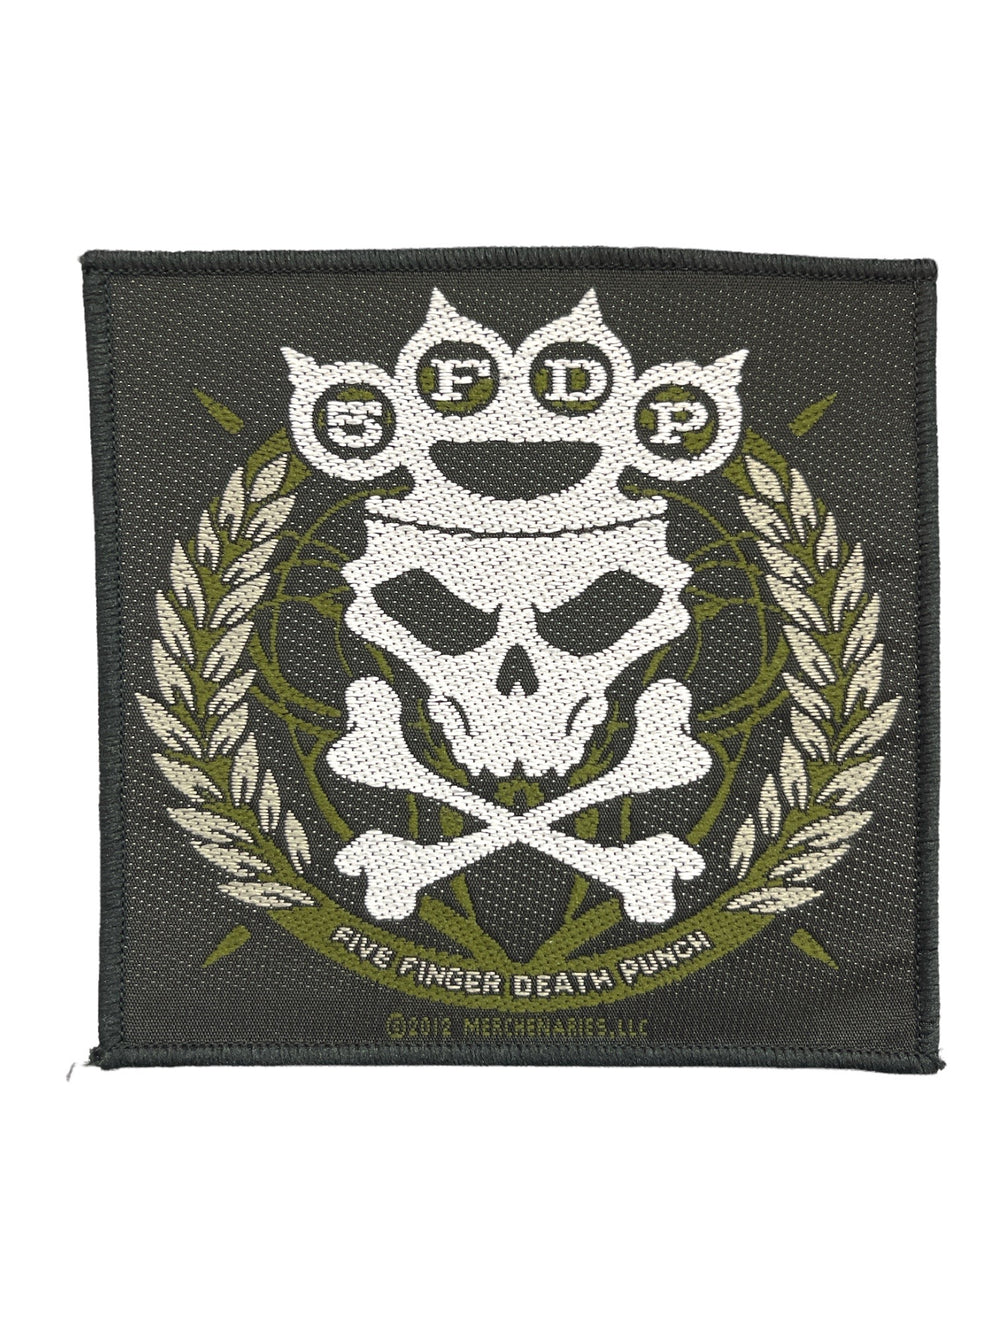 Five Finger Death Punch Skull Bones Official Woven Patch Brand New